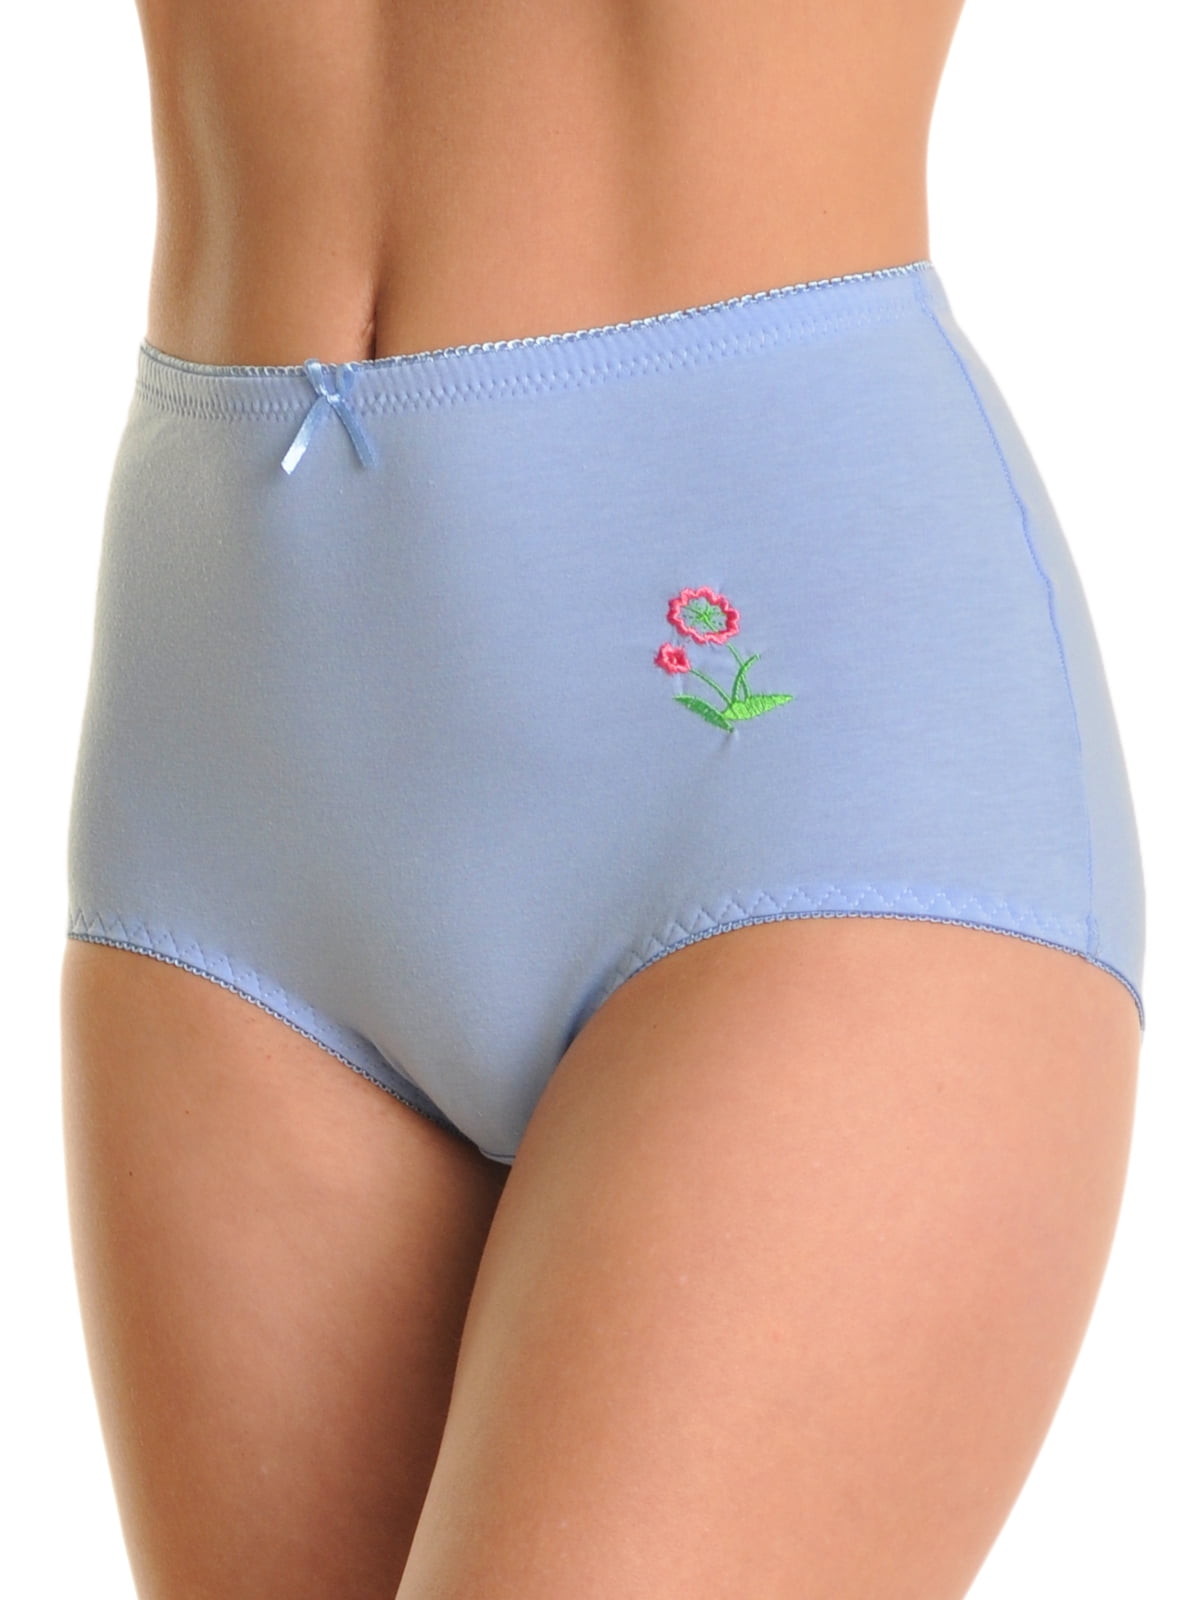 UPC 885851008128 product image for 2326261 DDI Cotton High Waist Briefs with Floral Embroidery, Assorted Color  | upcitemdb.com